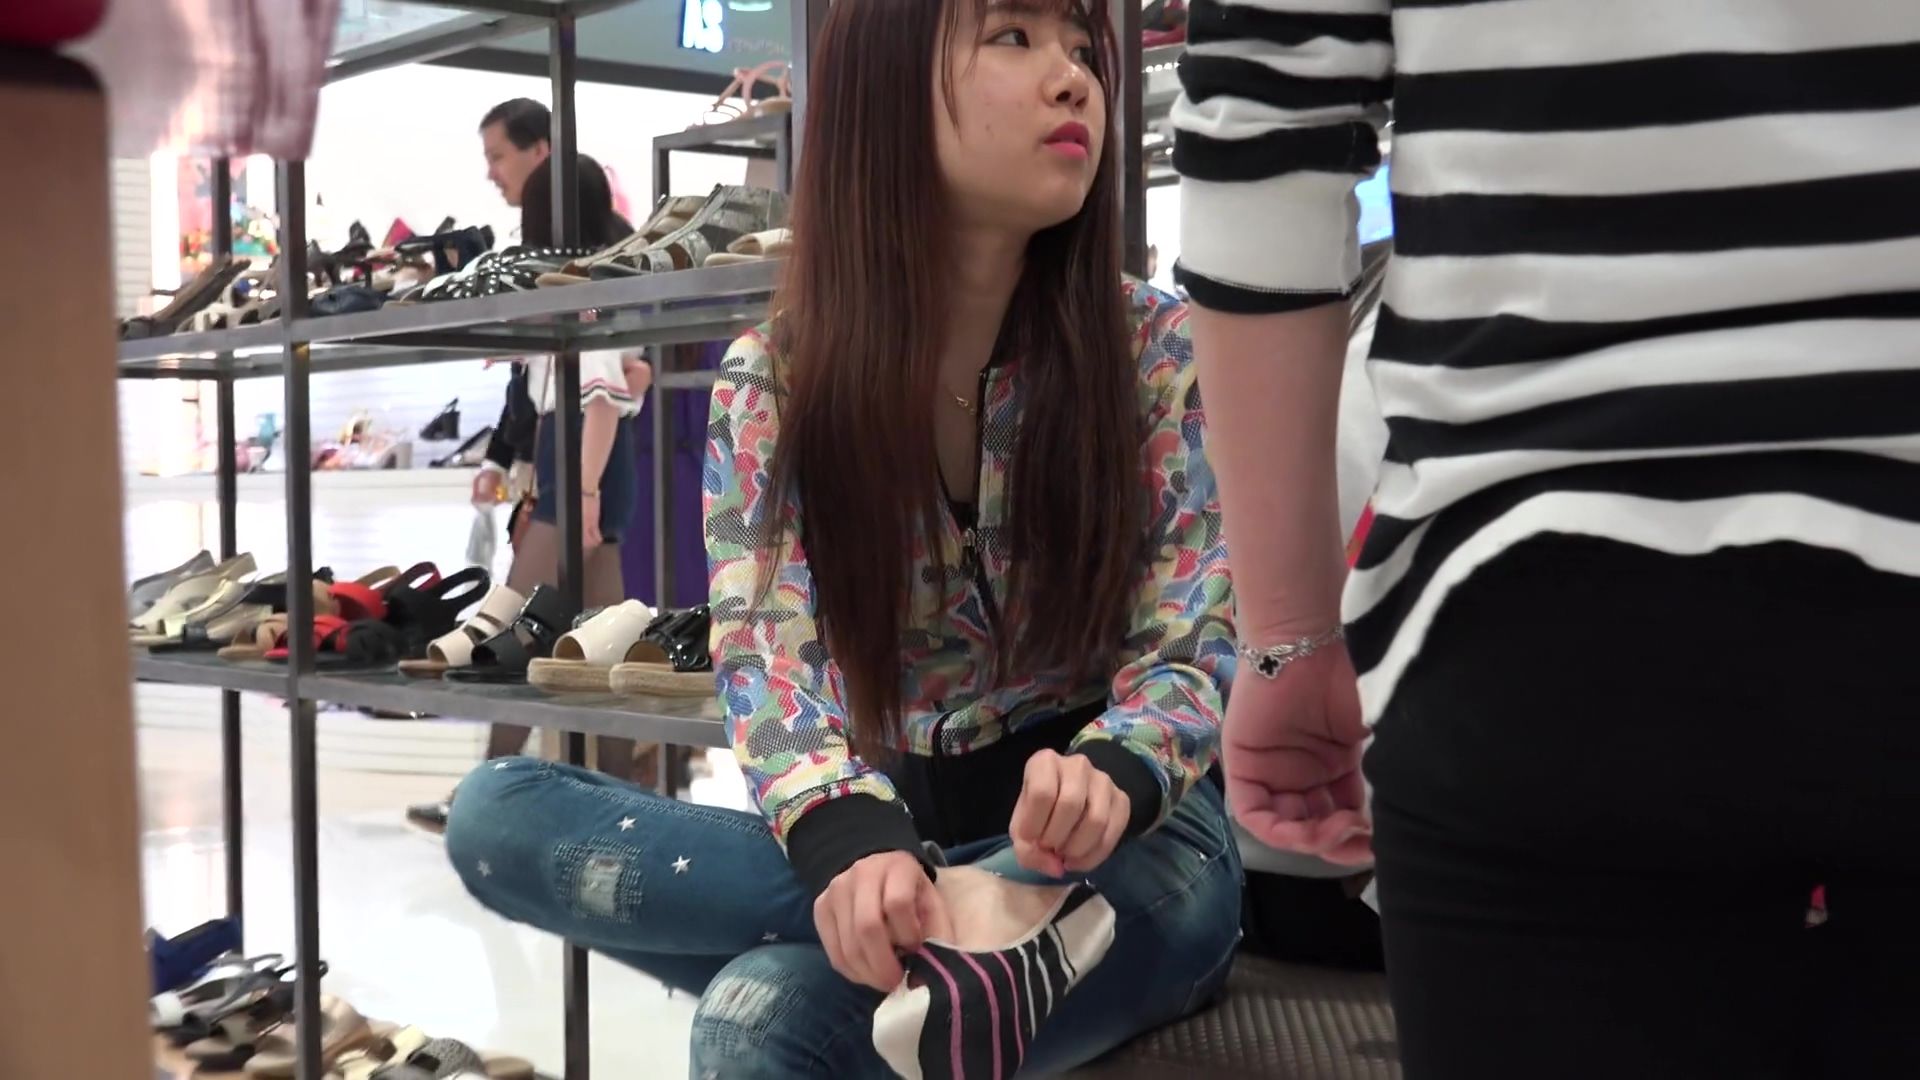 Roundass Skinny Asian Teen Filmed At The Shoe Store Trying On Sexy Flip Flops ViperGirls - 1